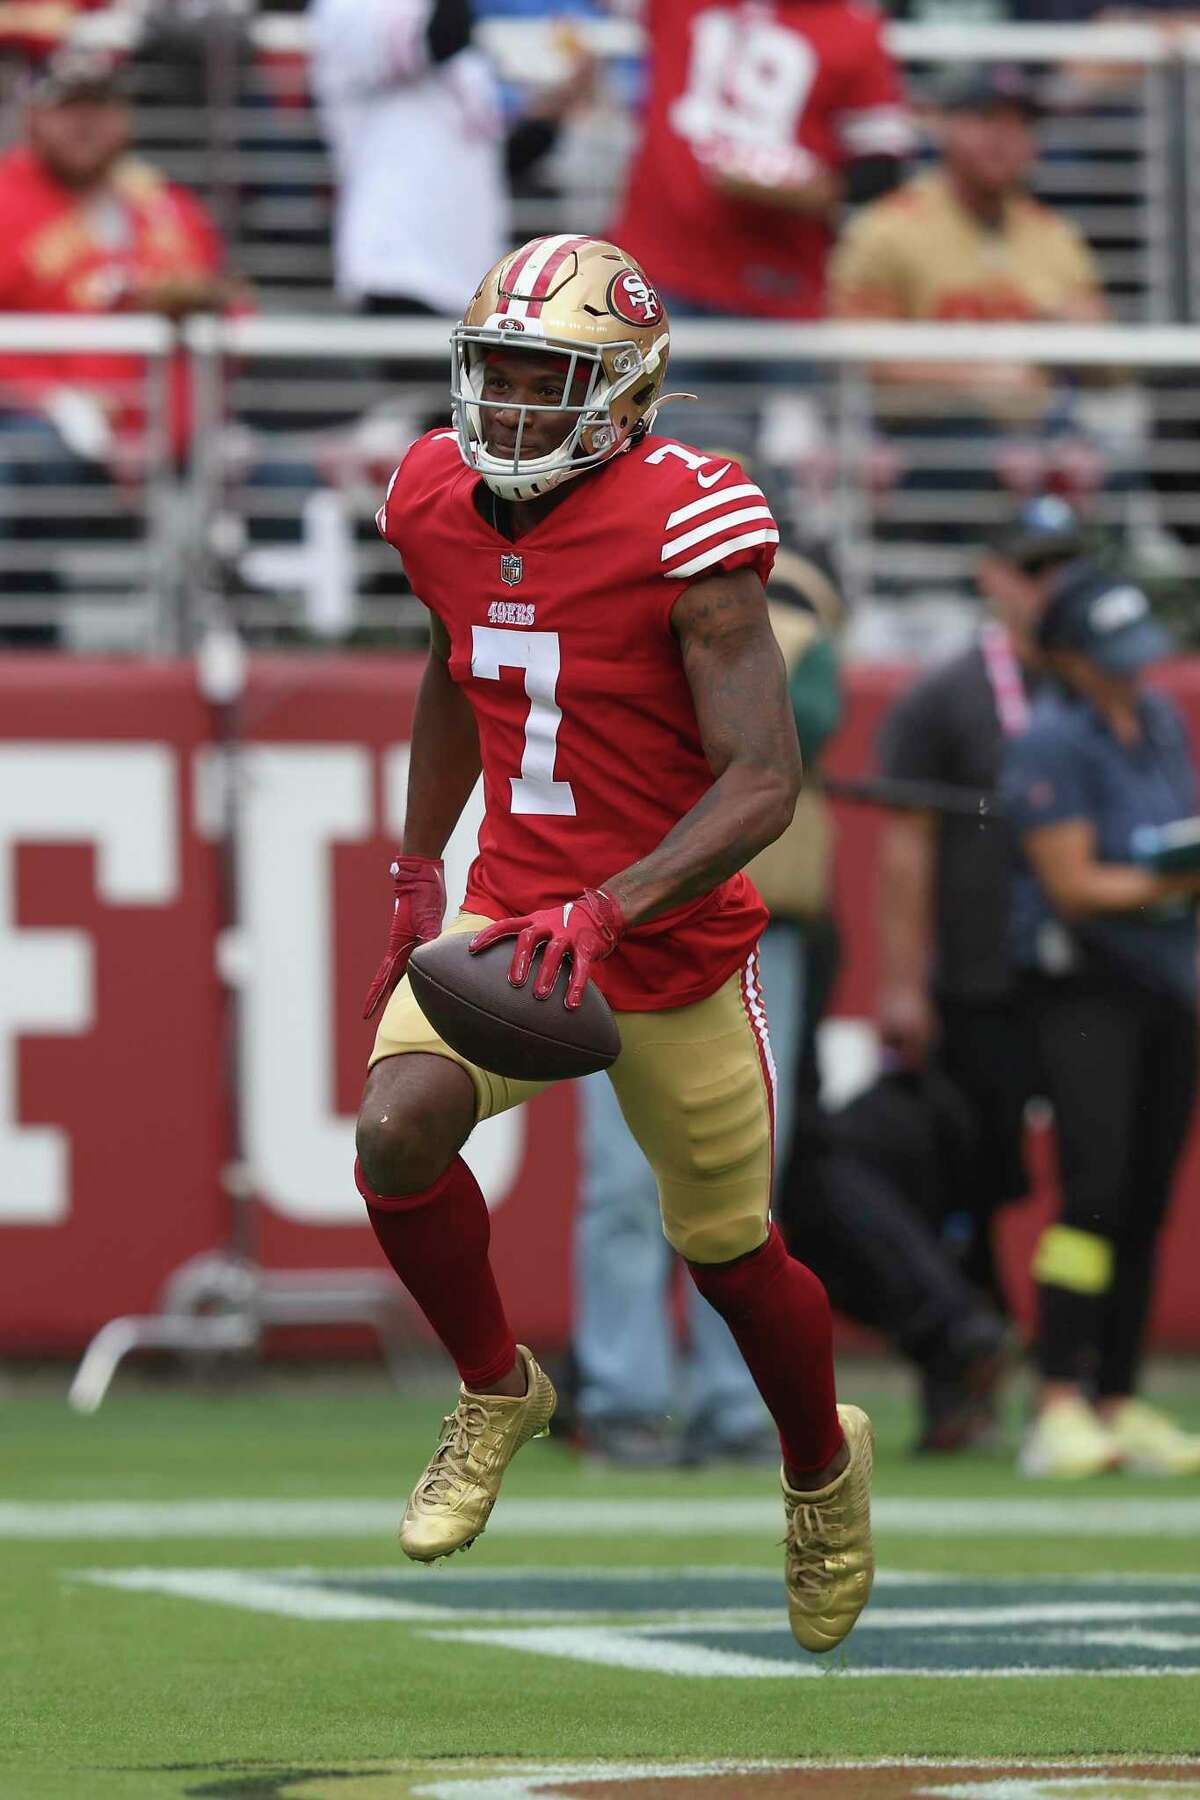 San Francisco 49ers cornerback Charvarius Ward (7) celebrates after catching an interception during an NFL football game against the Seattle Seahawks, Sunday, Sept. 18, 2022 in Santa Clara, Calif. (AP Photo/Lachlan Cunningham)